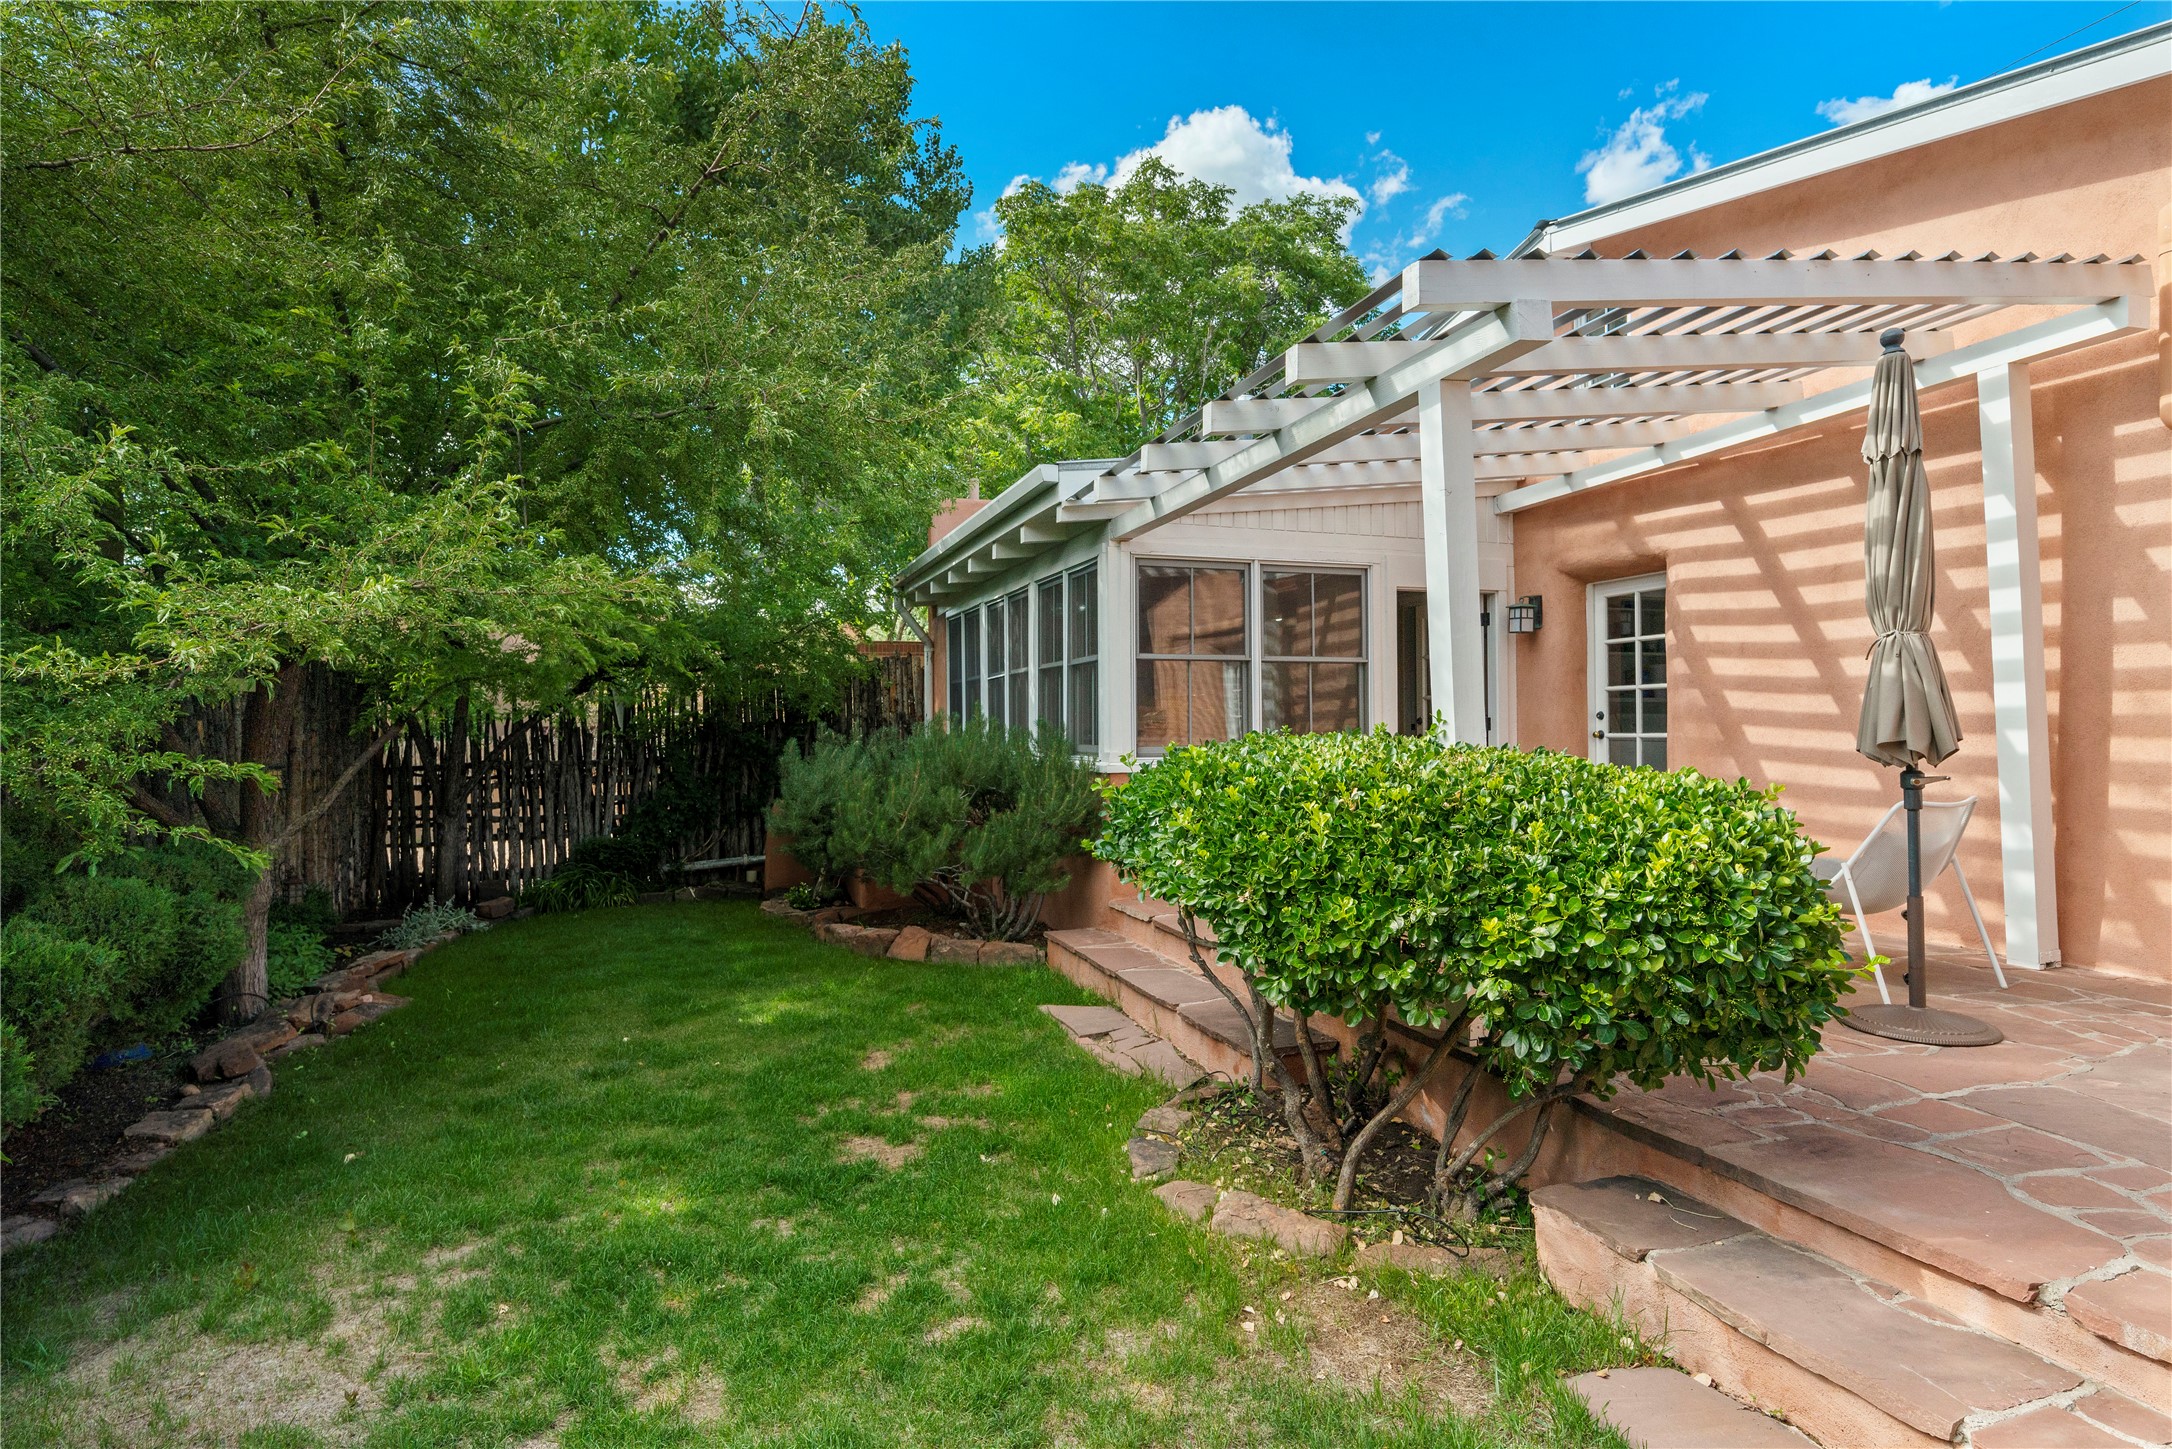 864 E Palace Avenue, Santa Fe, New Mexico 87501, 2 Bedrooms Bedrooms, ,2 BathroomsBathrooms,Residential,For Sale,864 E Palace Avenue,202231954